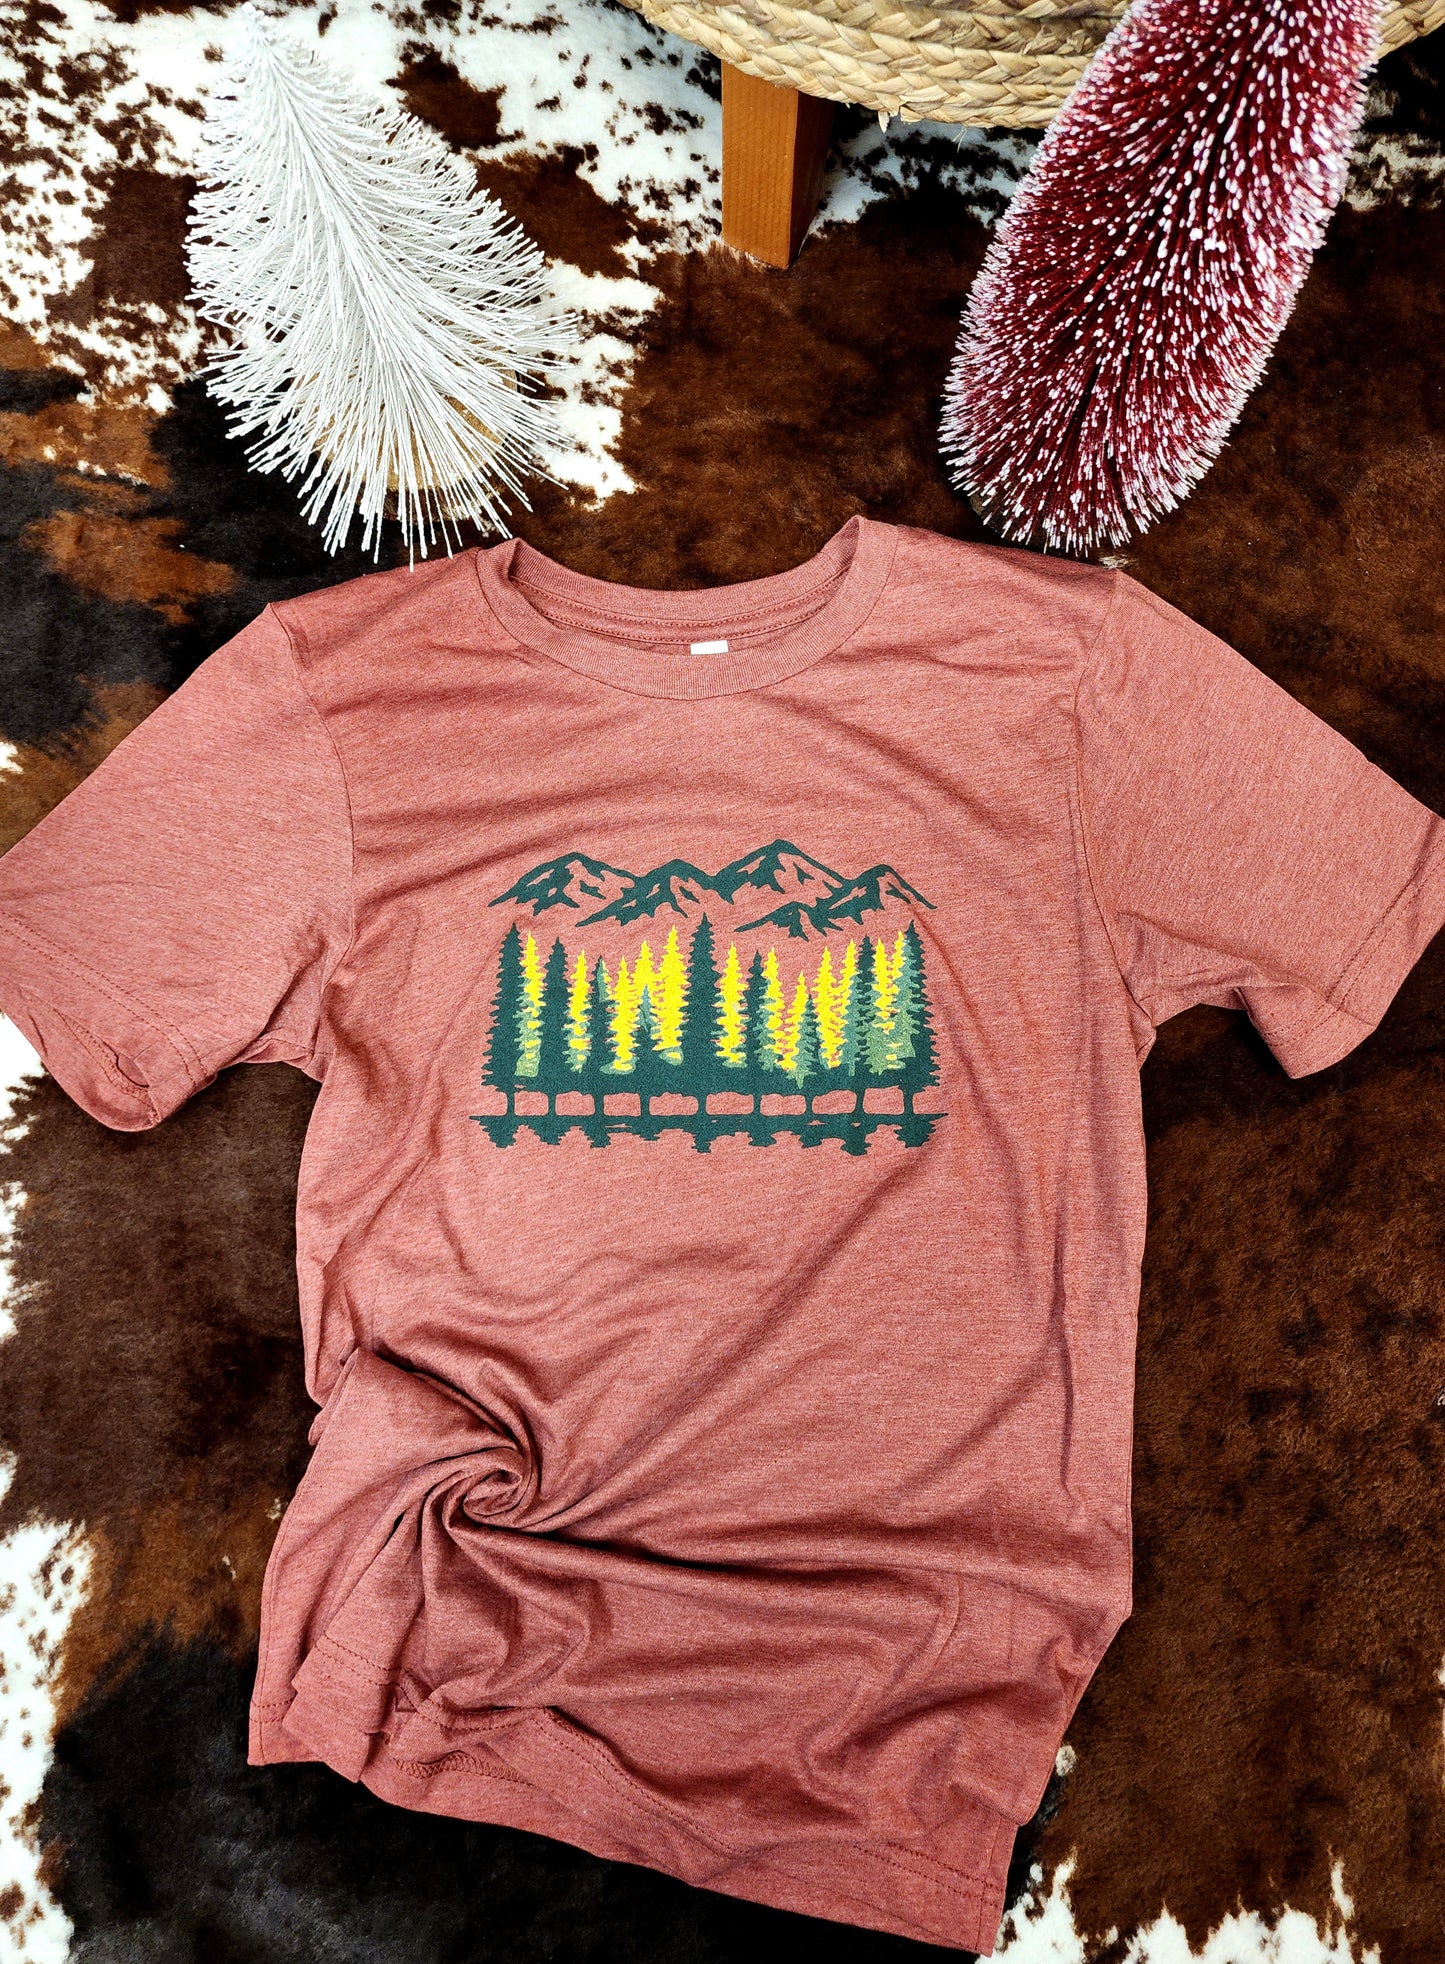 The Mountains are calling T shirt